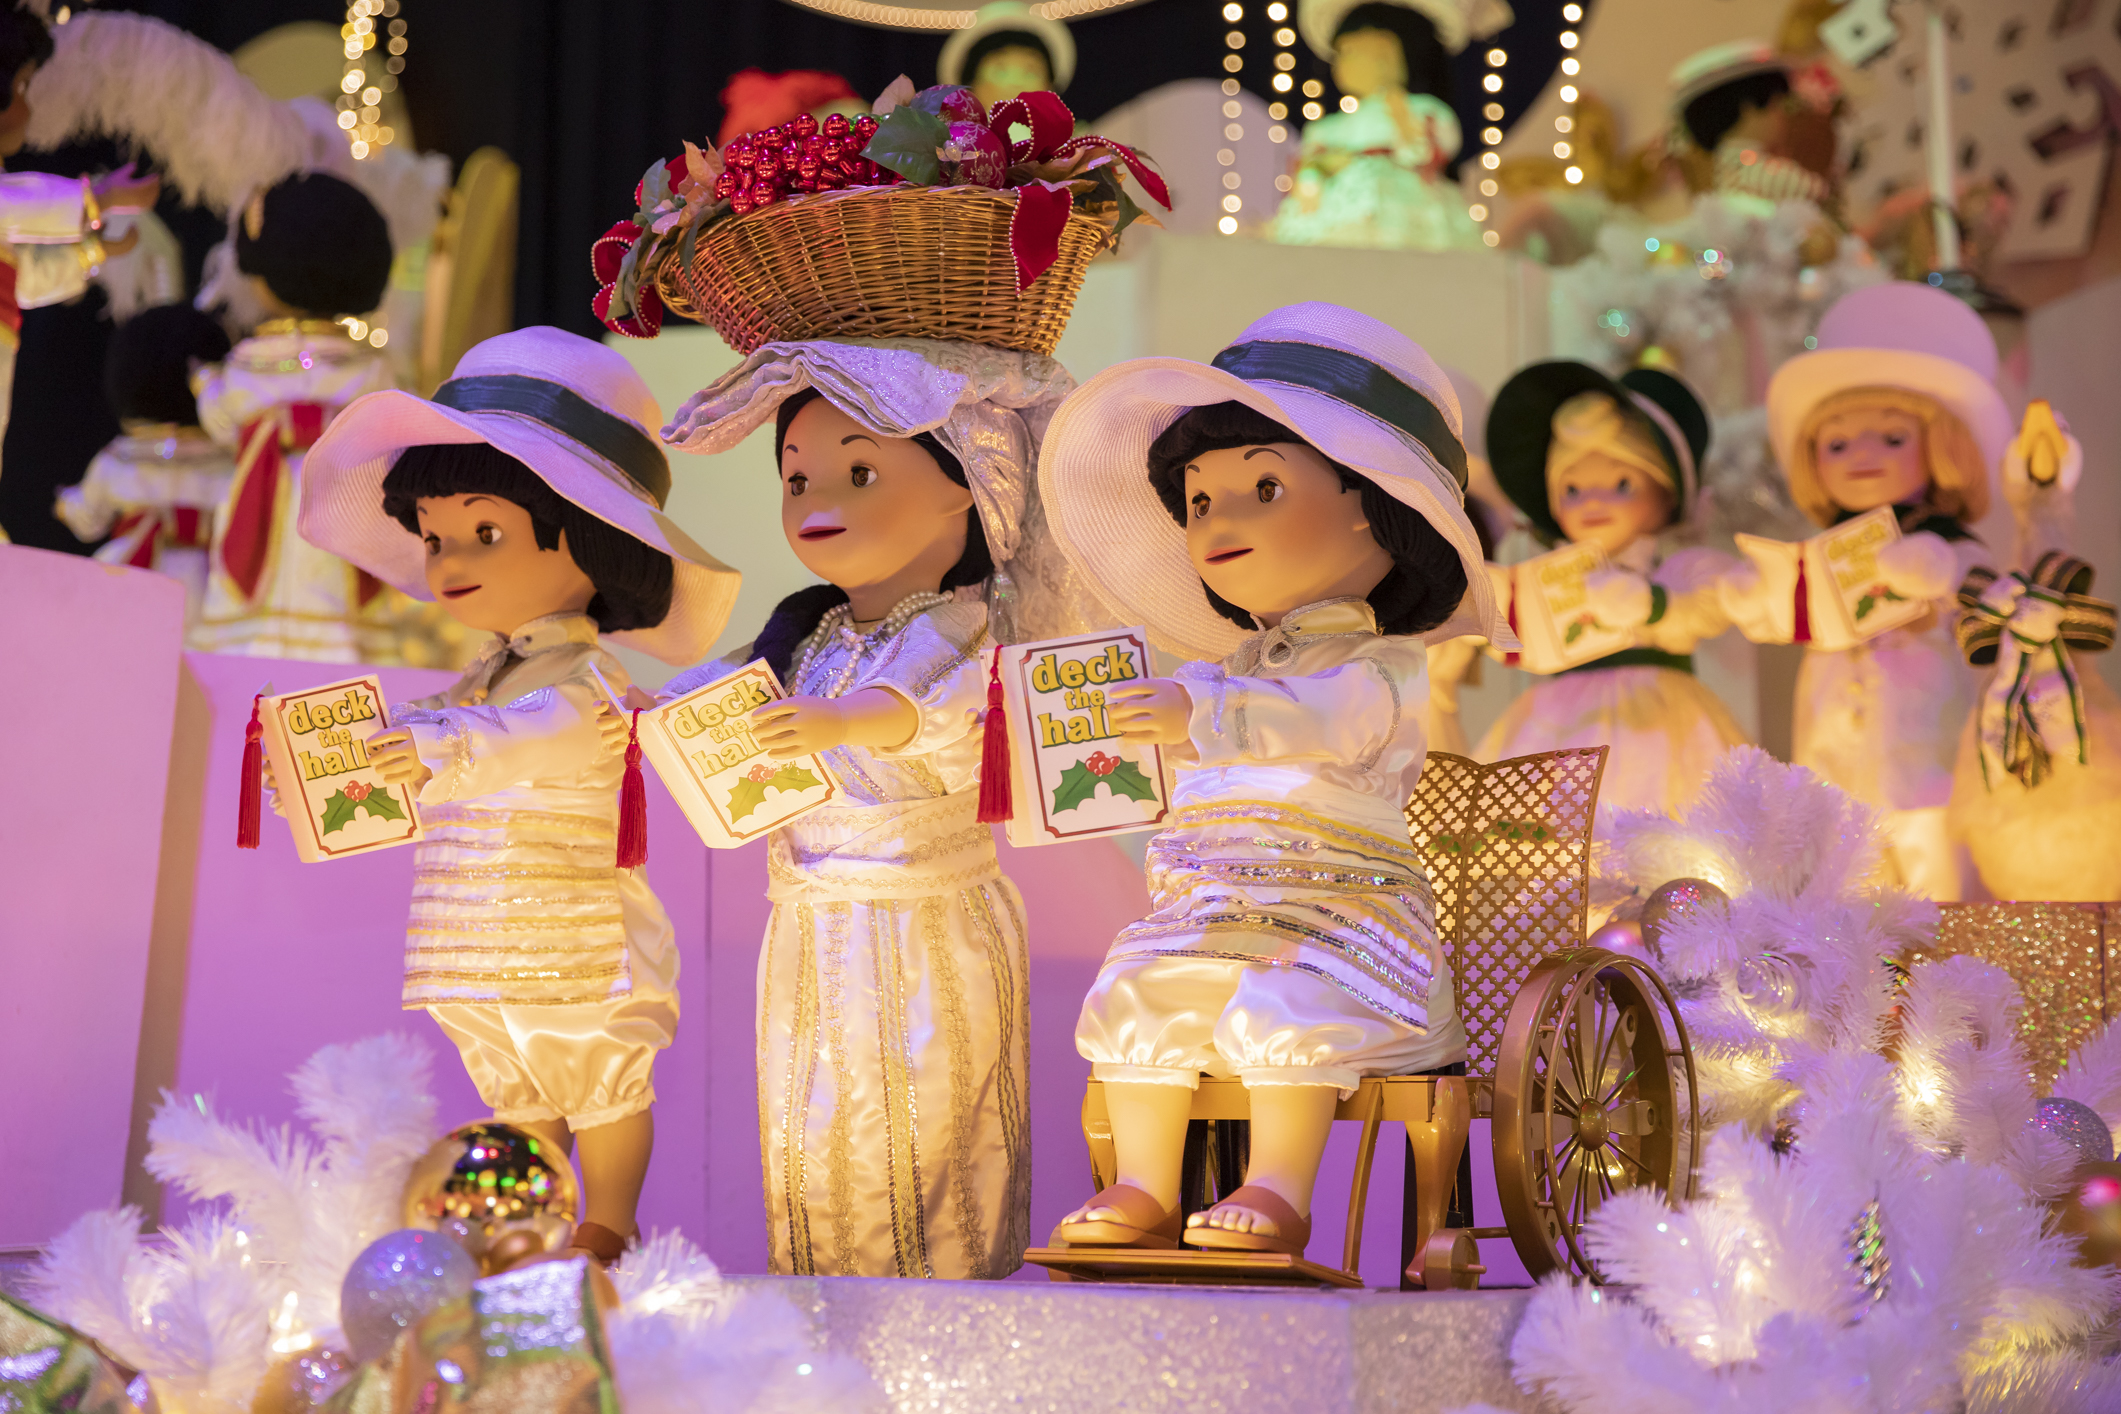 It’s a Small World will reopen Spring 2023 at Disneyland Paris